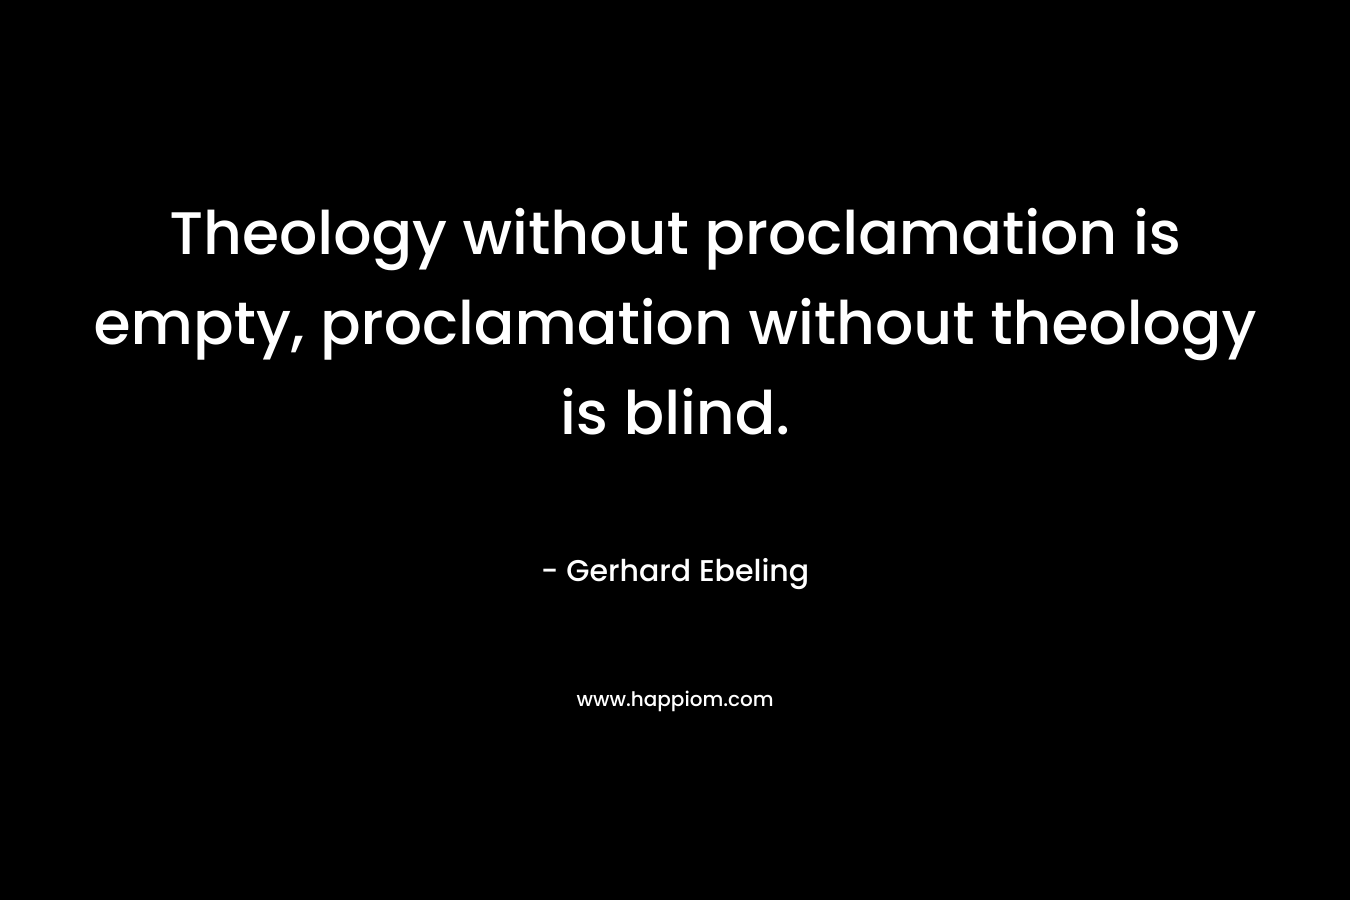 Theology without proclamation is empty, proclamation without theology is blind.